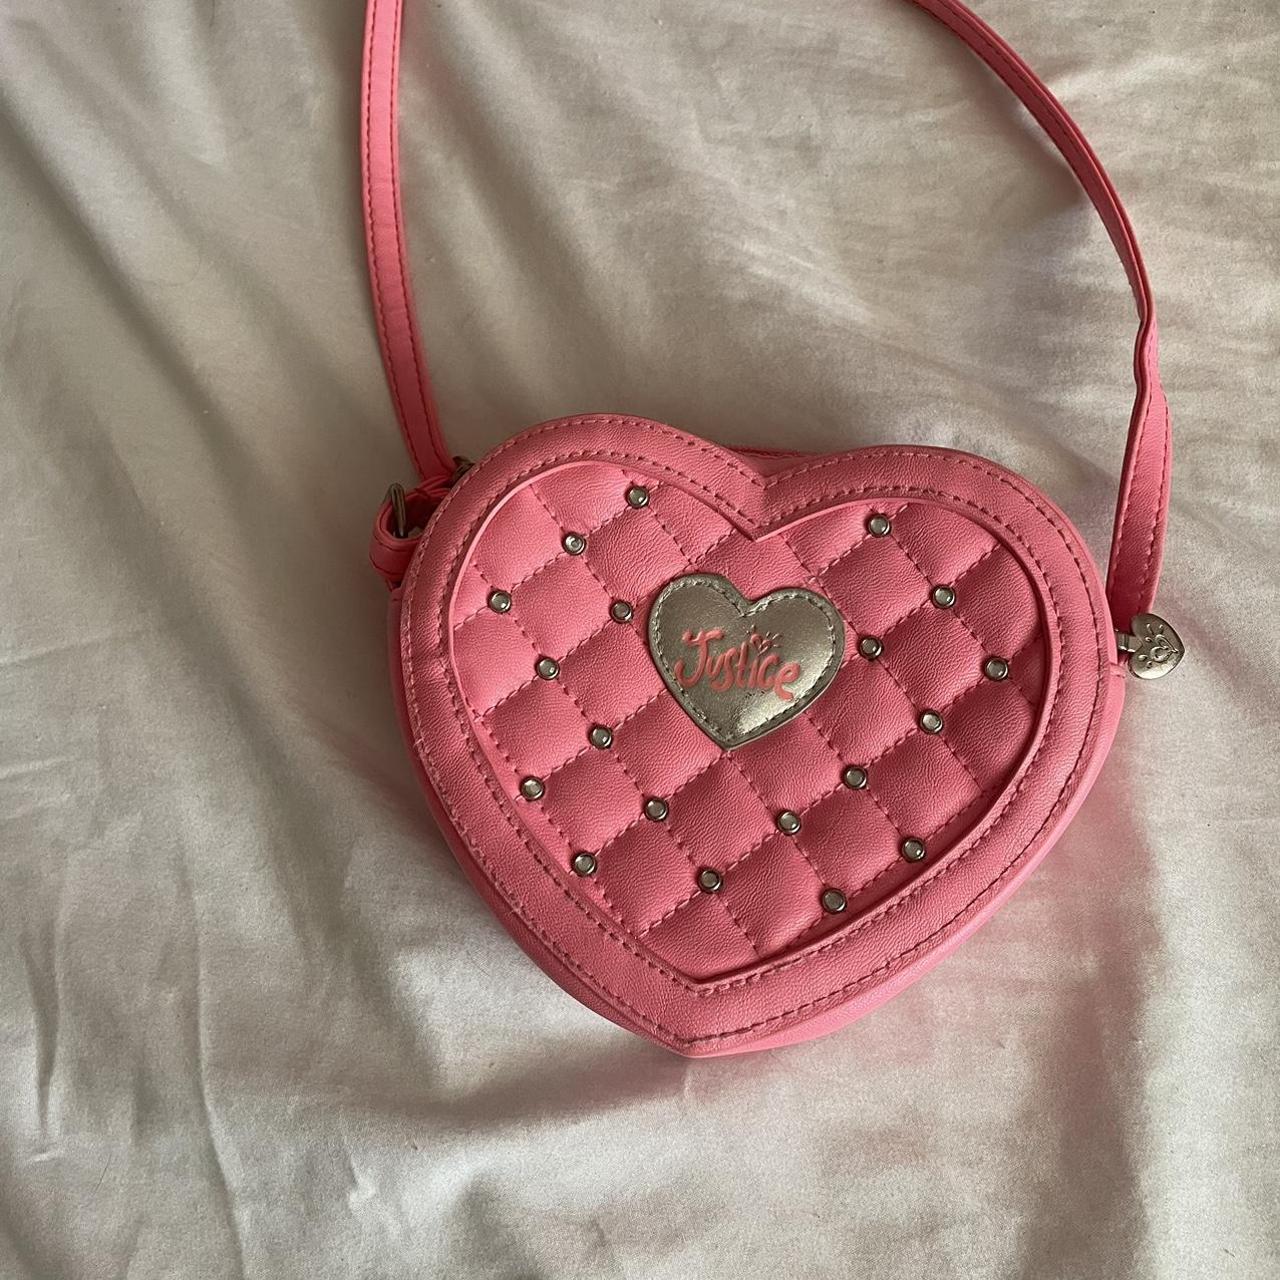 Justice pink crossbody bag, it’s pretty beat up on... - Depop